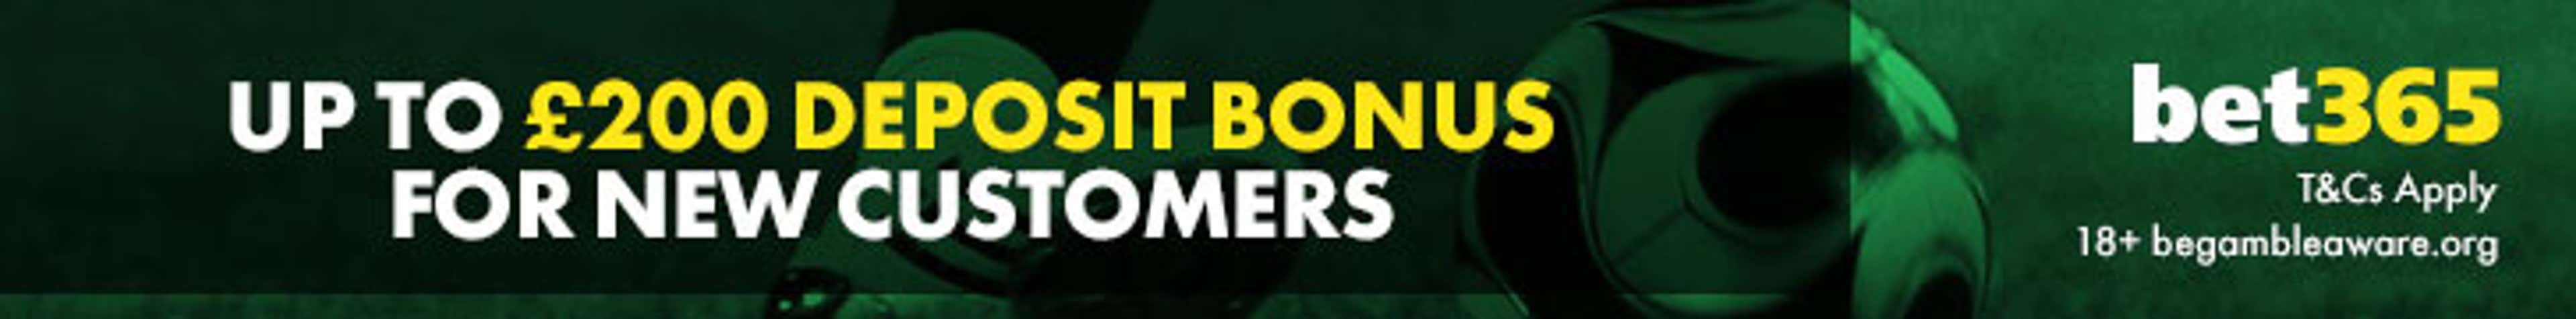 bet365 new footer banner